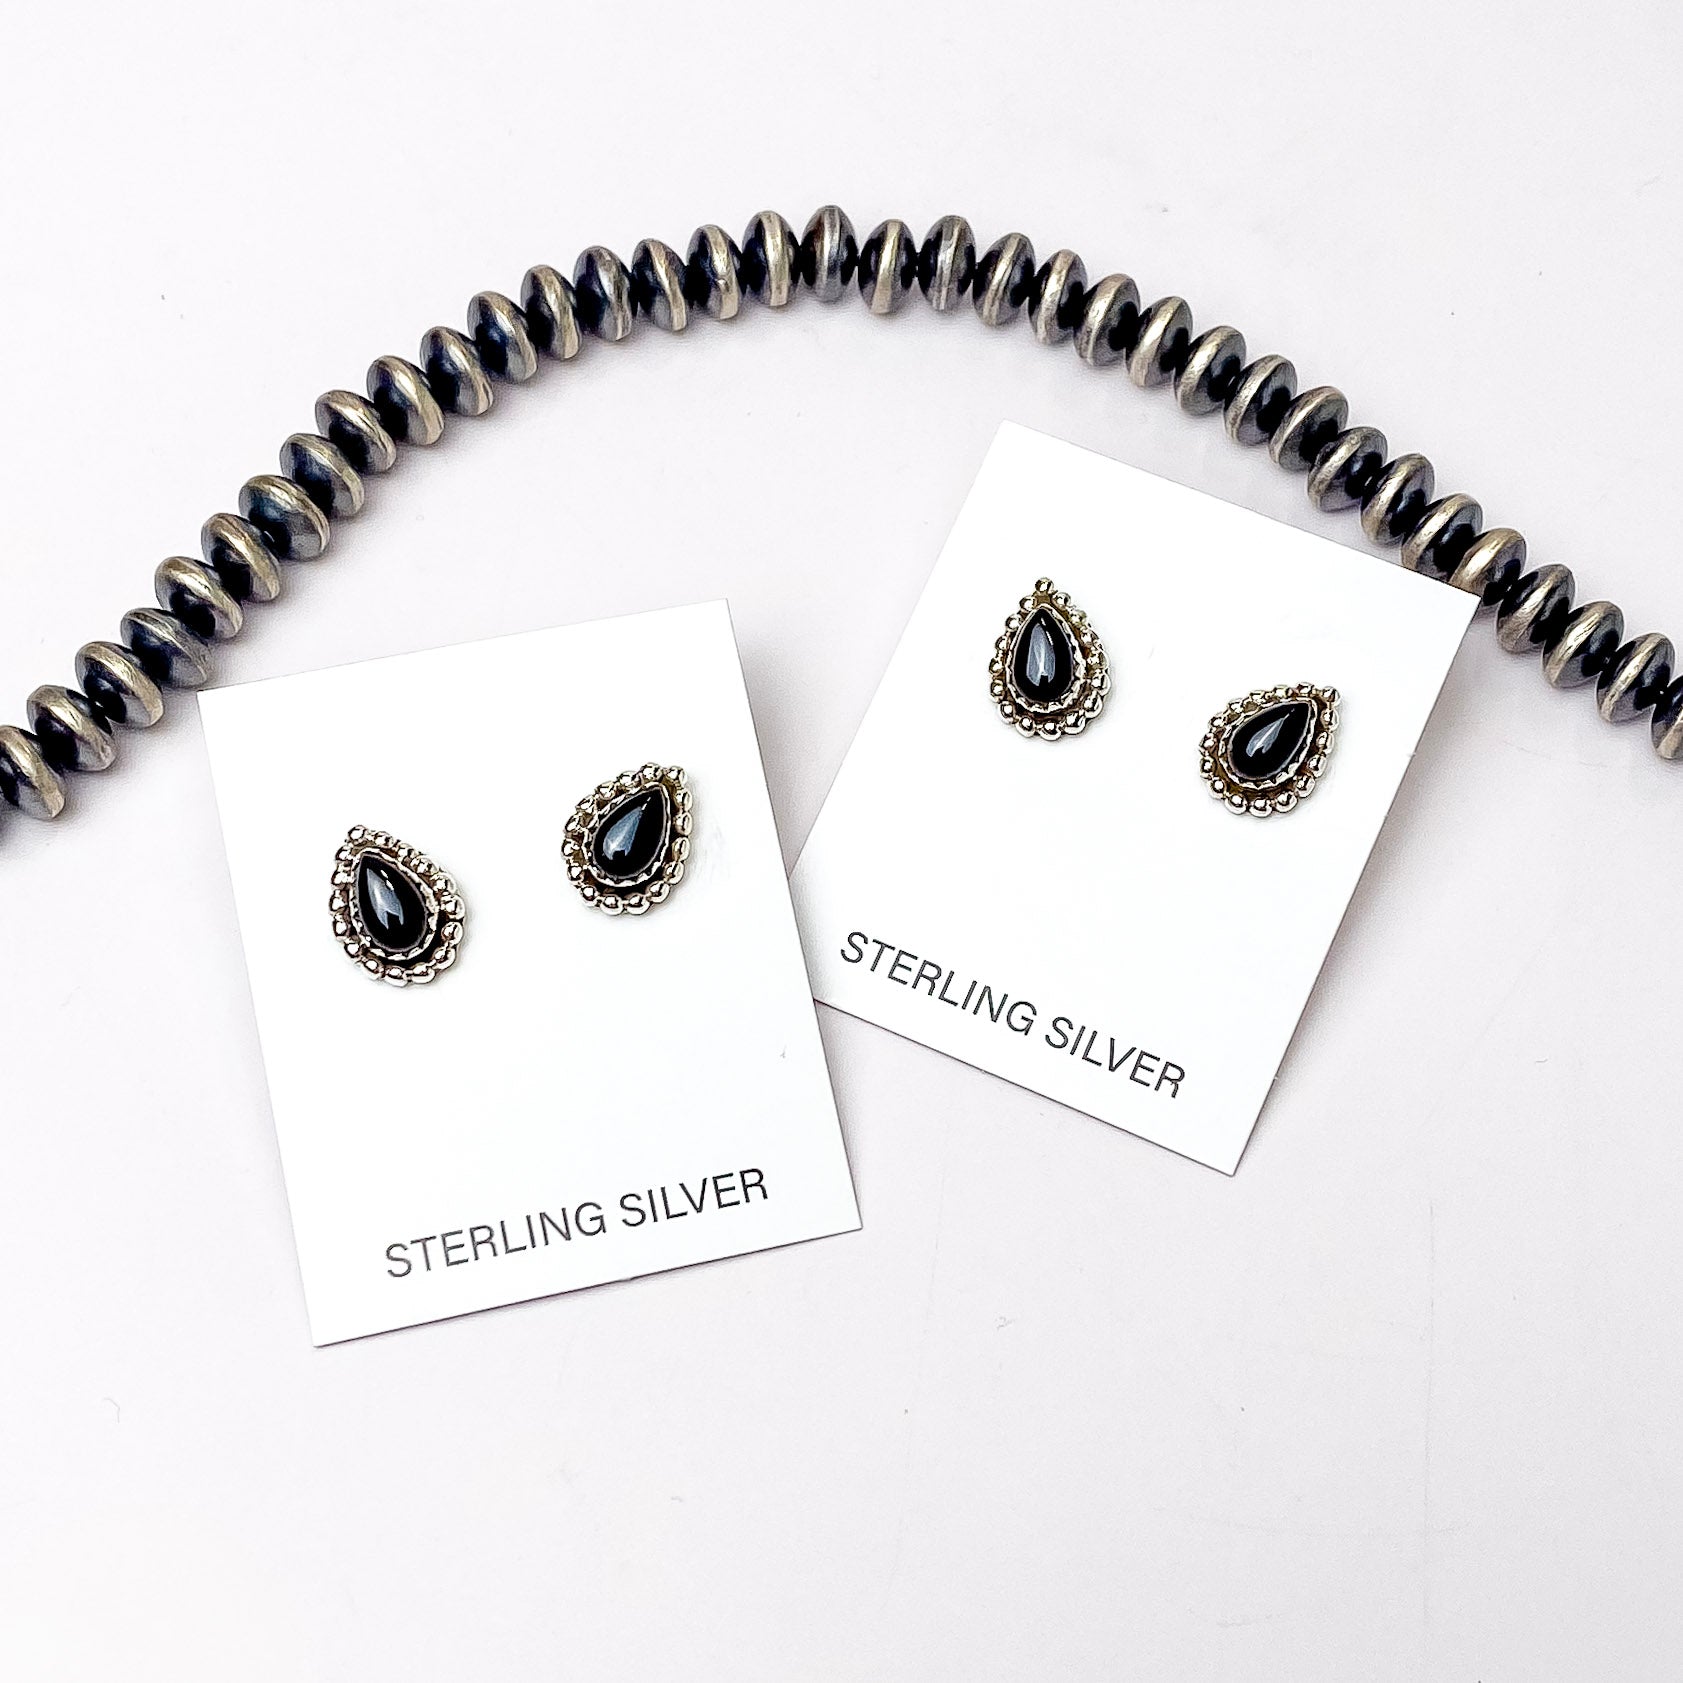 These gorgeous earrings include a sterling silver teardrop shaped setting with black onyx  stones in the center with a white background